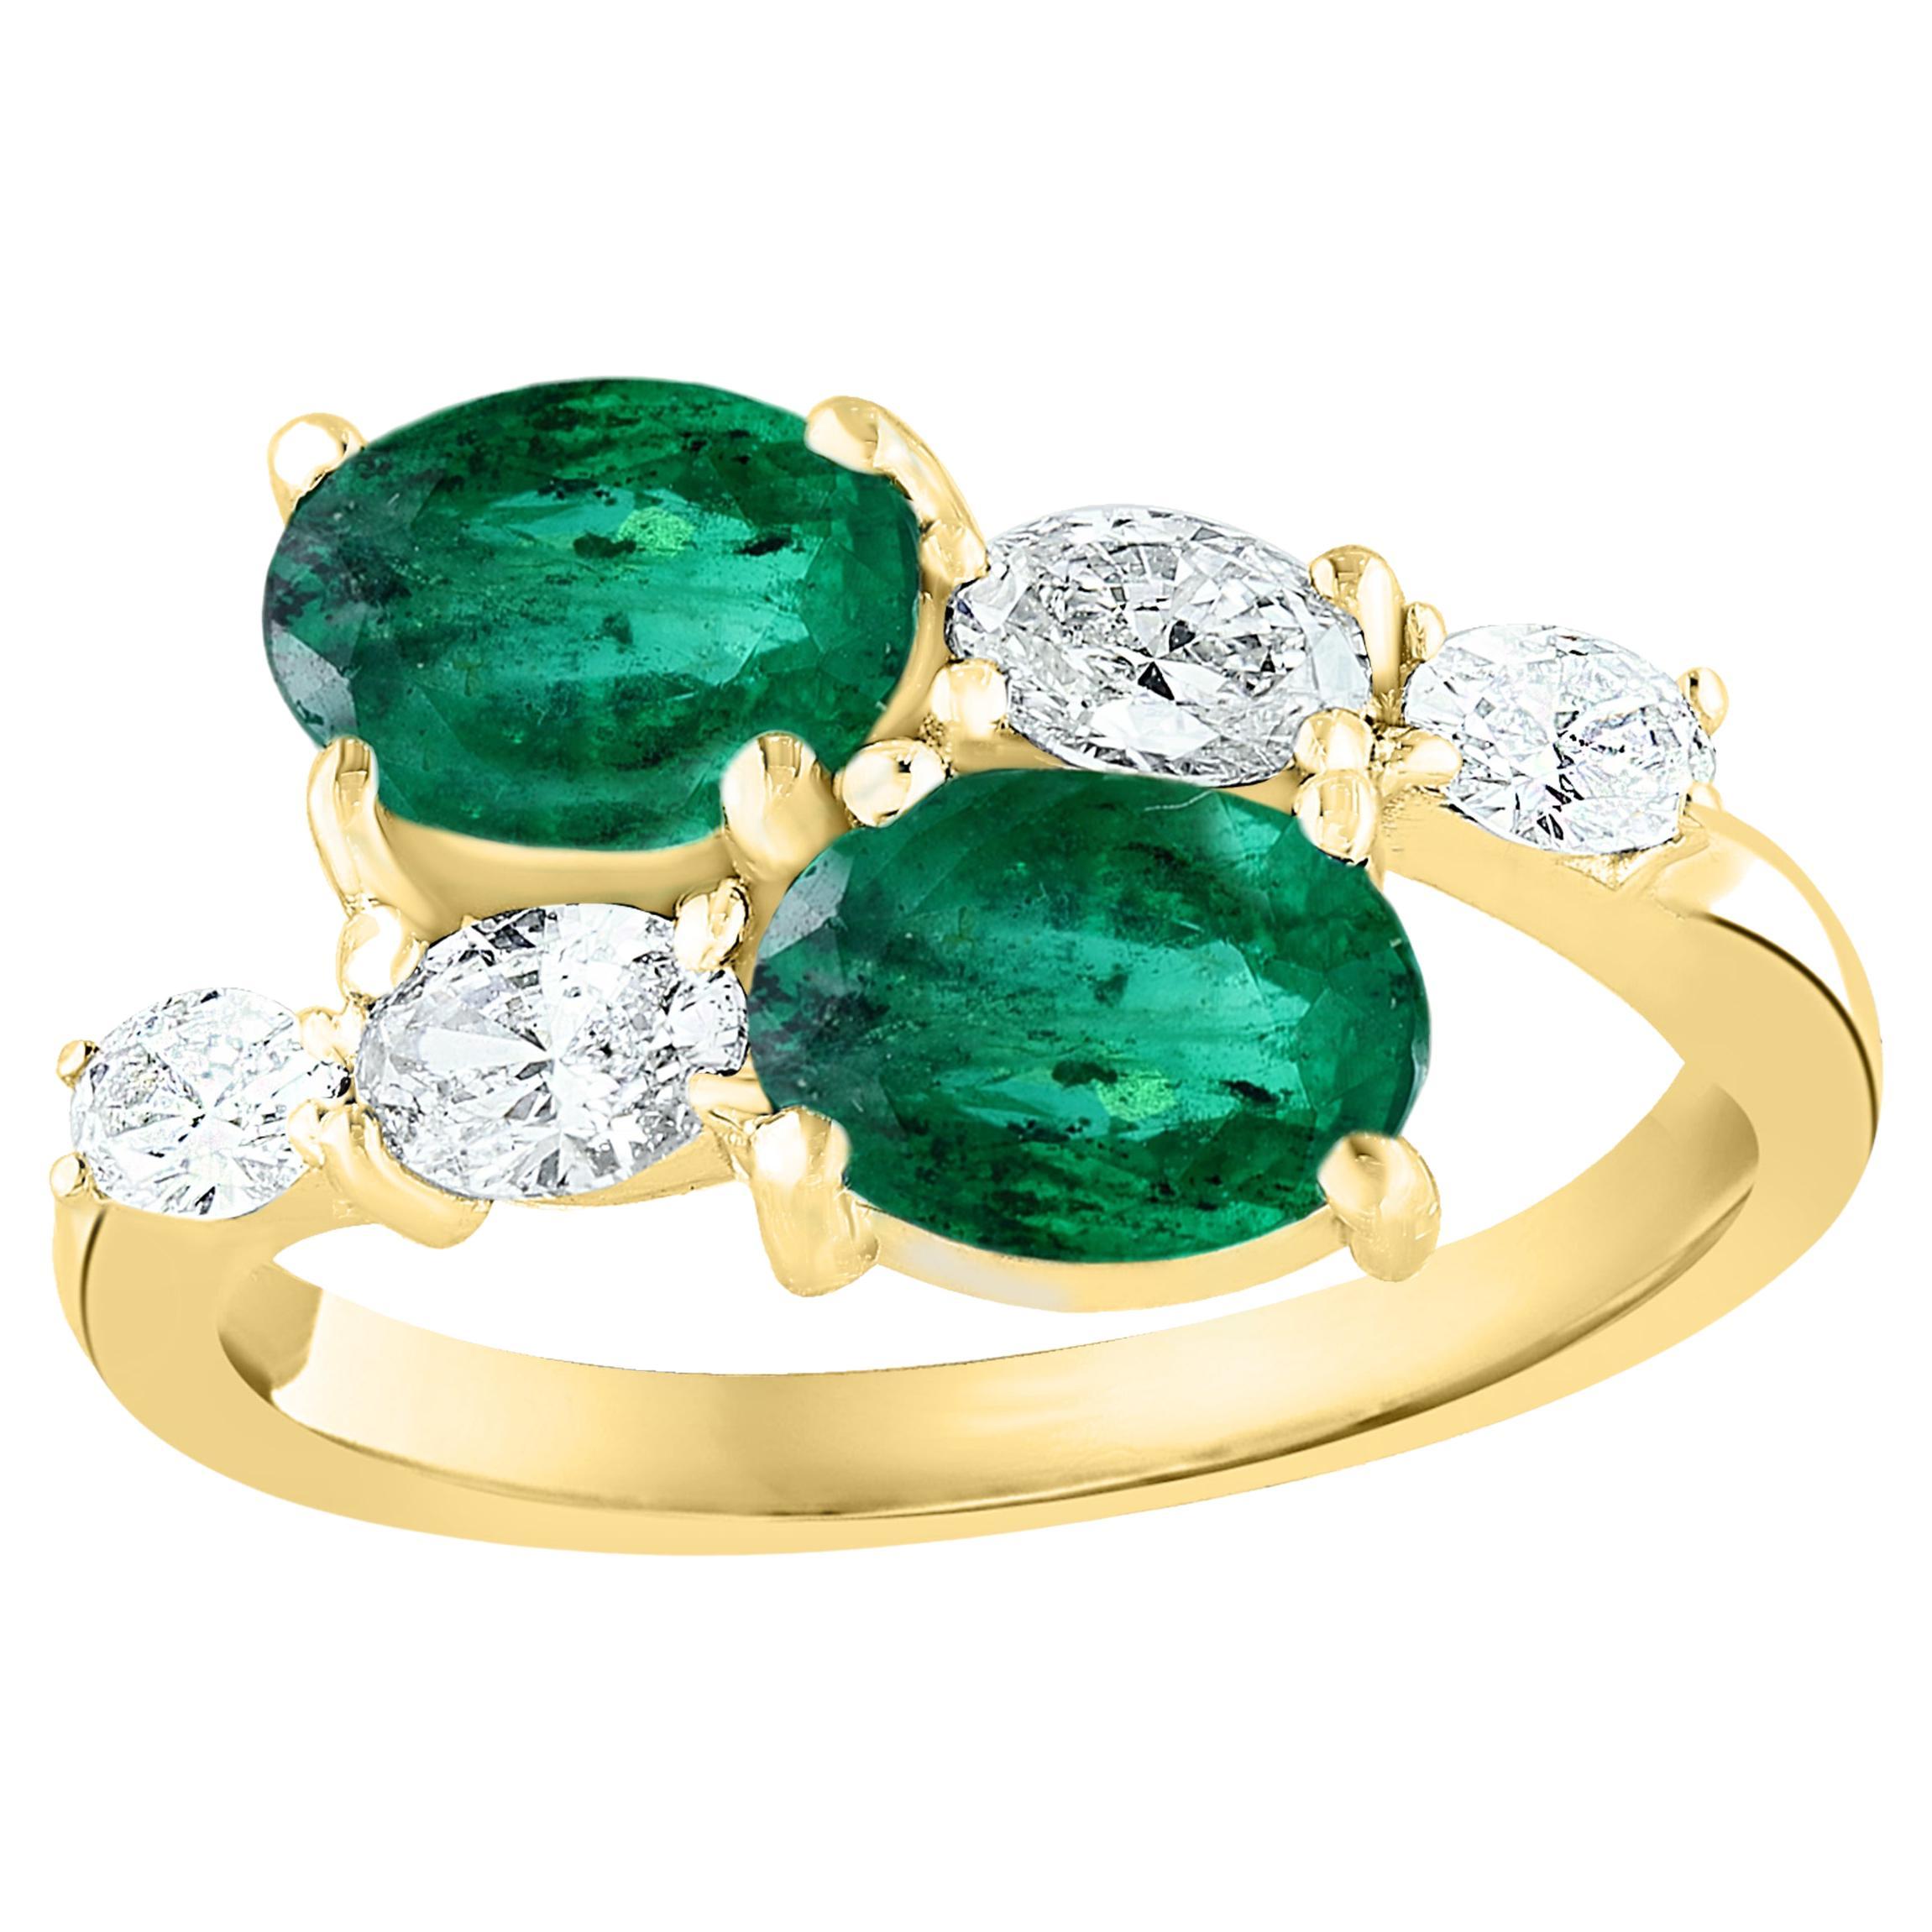 1.54 Carat Oval Cut Emerald Diamond Toi Et Moi Engagement Ring 14K Yellow Gold For Sale